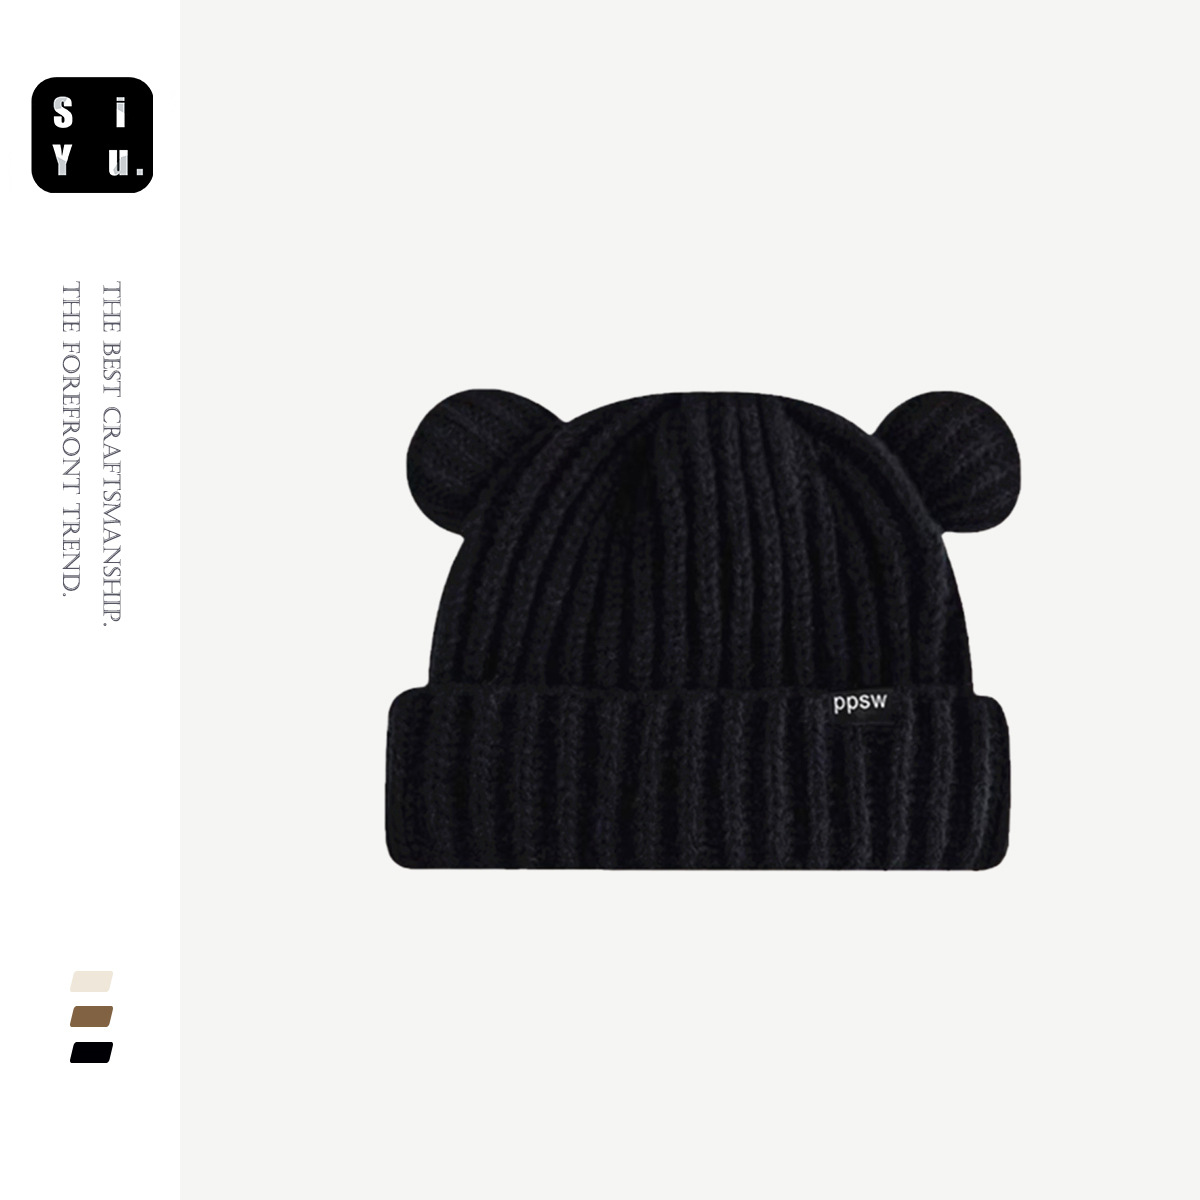 Douyin Online Influencer Same Cute Bear Woolen Cap Female Cold Protection in Winter Warm Korean Letter Cloth Label Knitted Hat Male